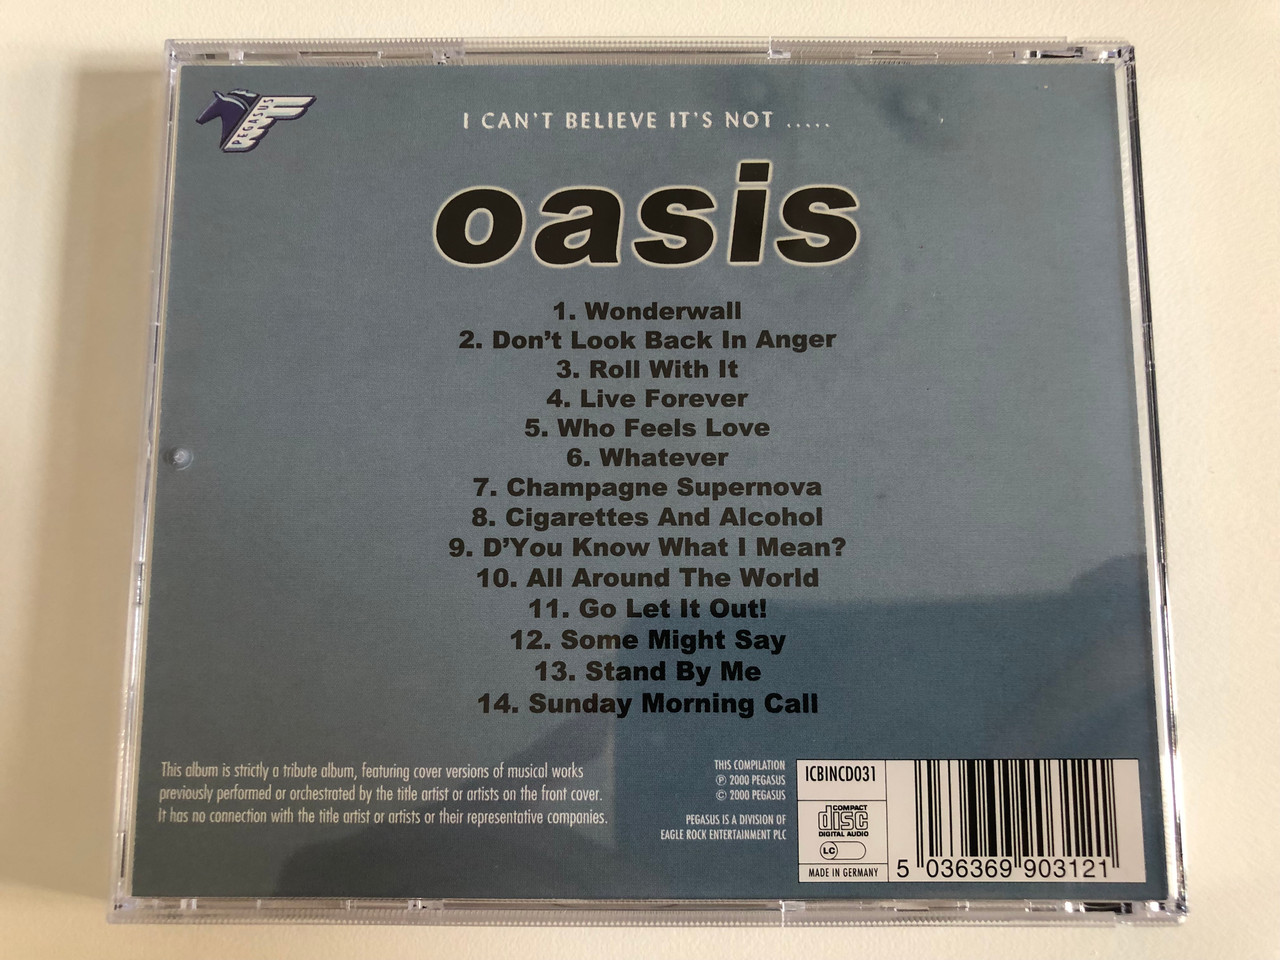 https://cdn10.bigcommerce.com/s-62bdpkt7pb/products/31263/images/184034/I_Cant_Believe_Its_Not..._-_Oasis_Track_performed_by_The_Wonderwallers_Include_All_Around_The_World_Go_Let_It_Out_Wonderwall_Pegasus_Audio_CD_2000_ICBINCD031_4__80145.1625844659.1280.1280.JPG?c=2